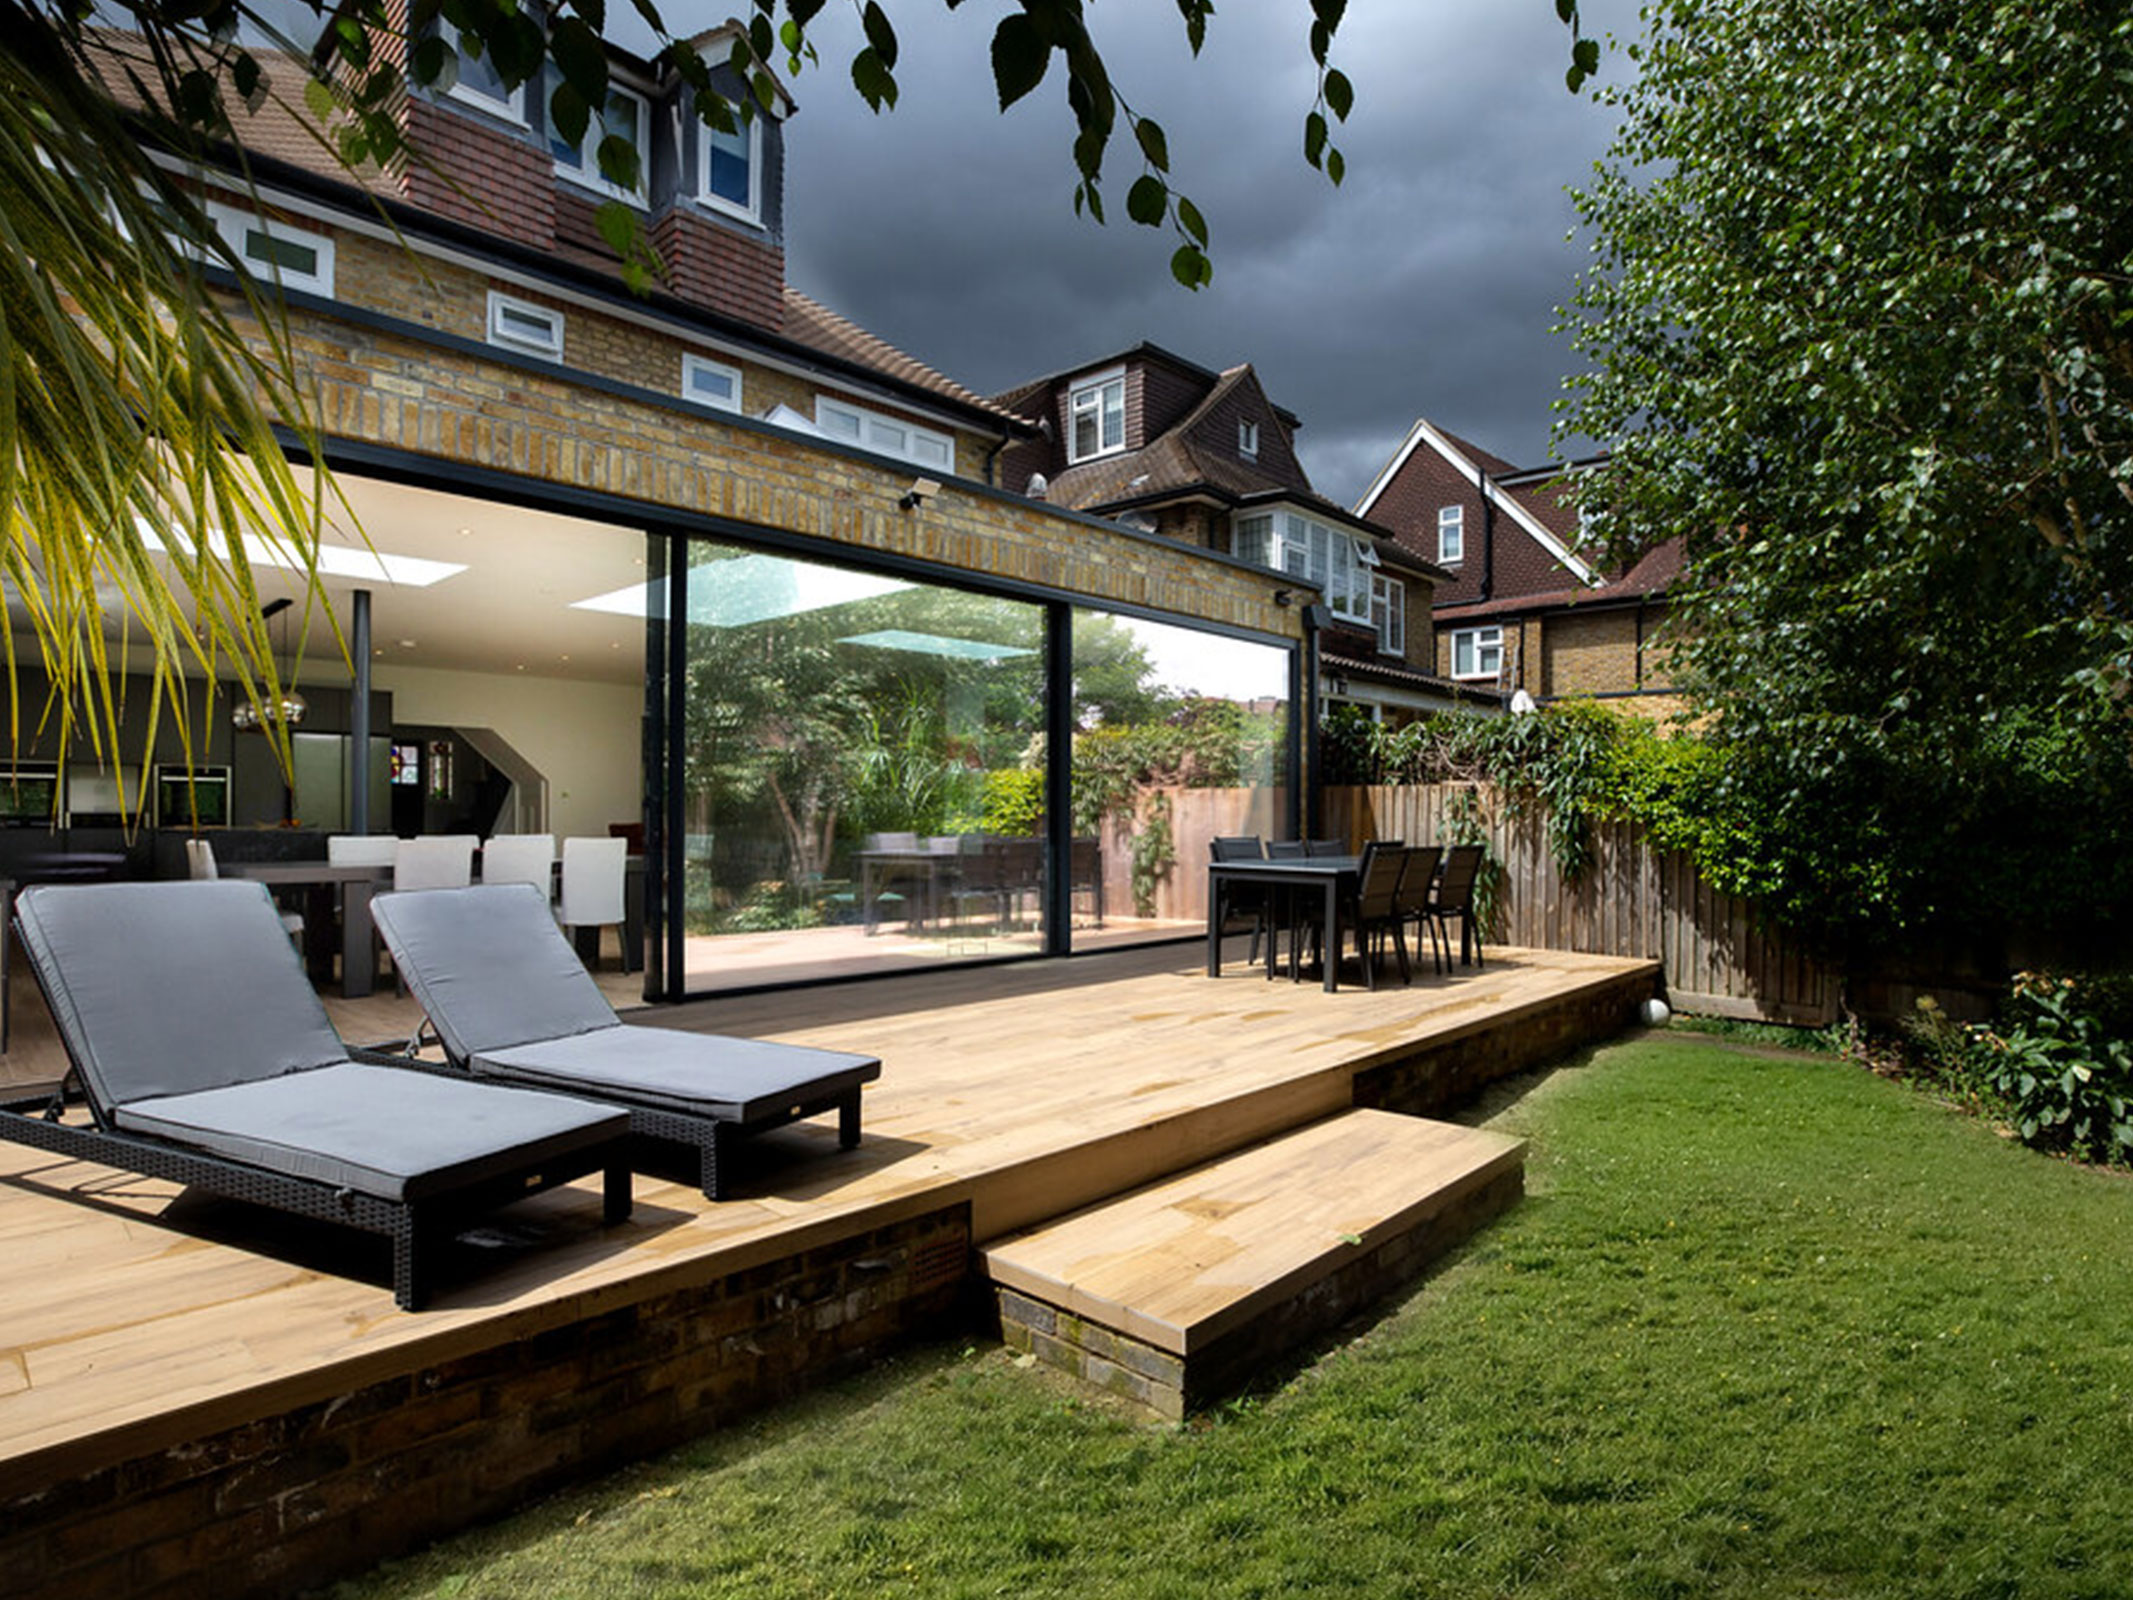 London Park Gate Gardens House Renovation and Landscaping